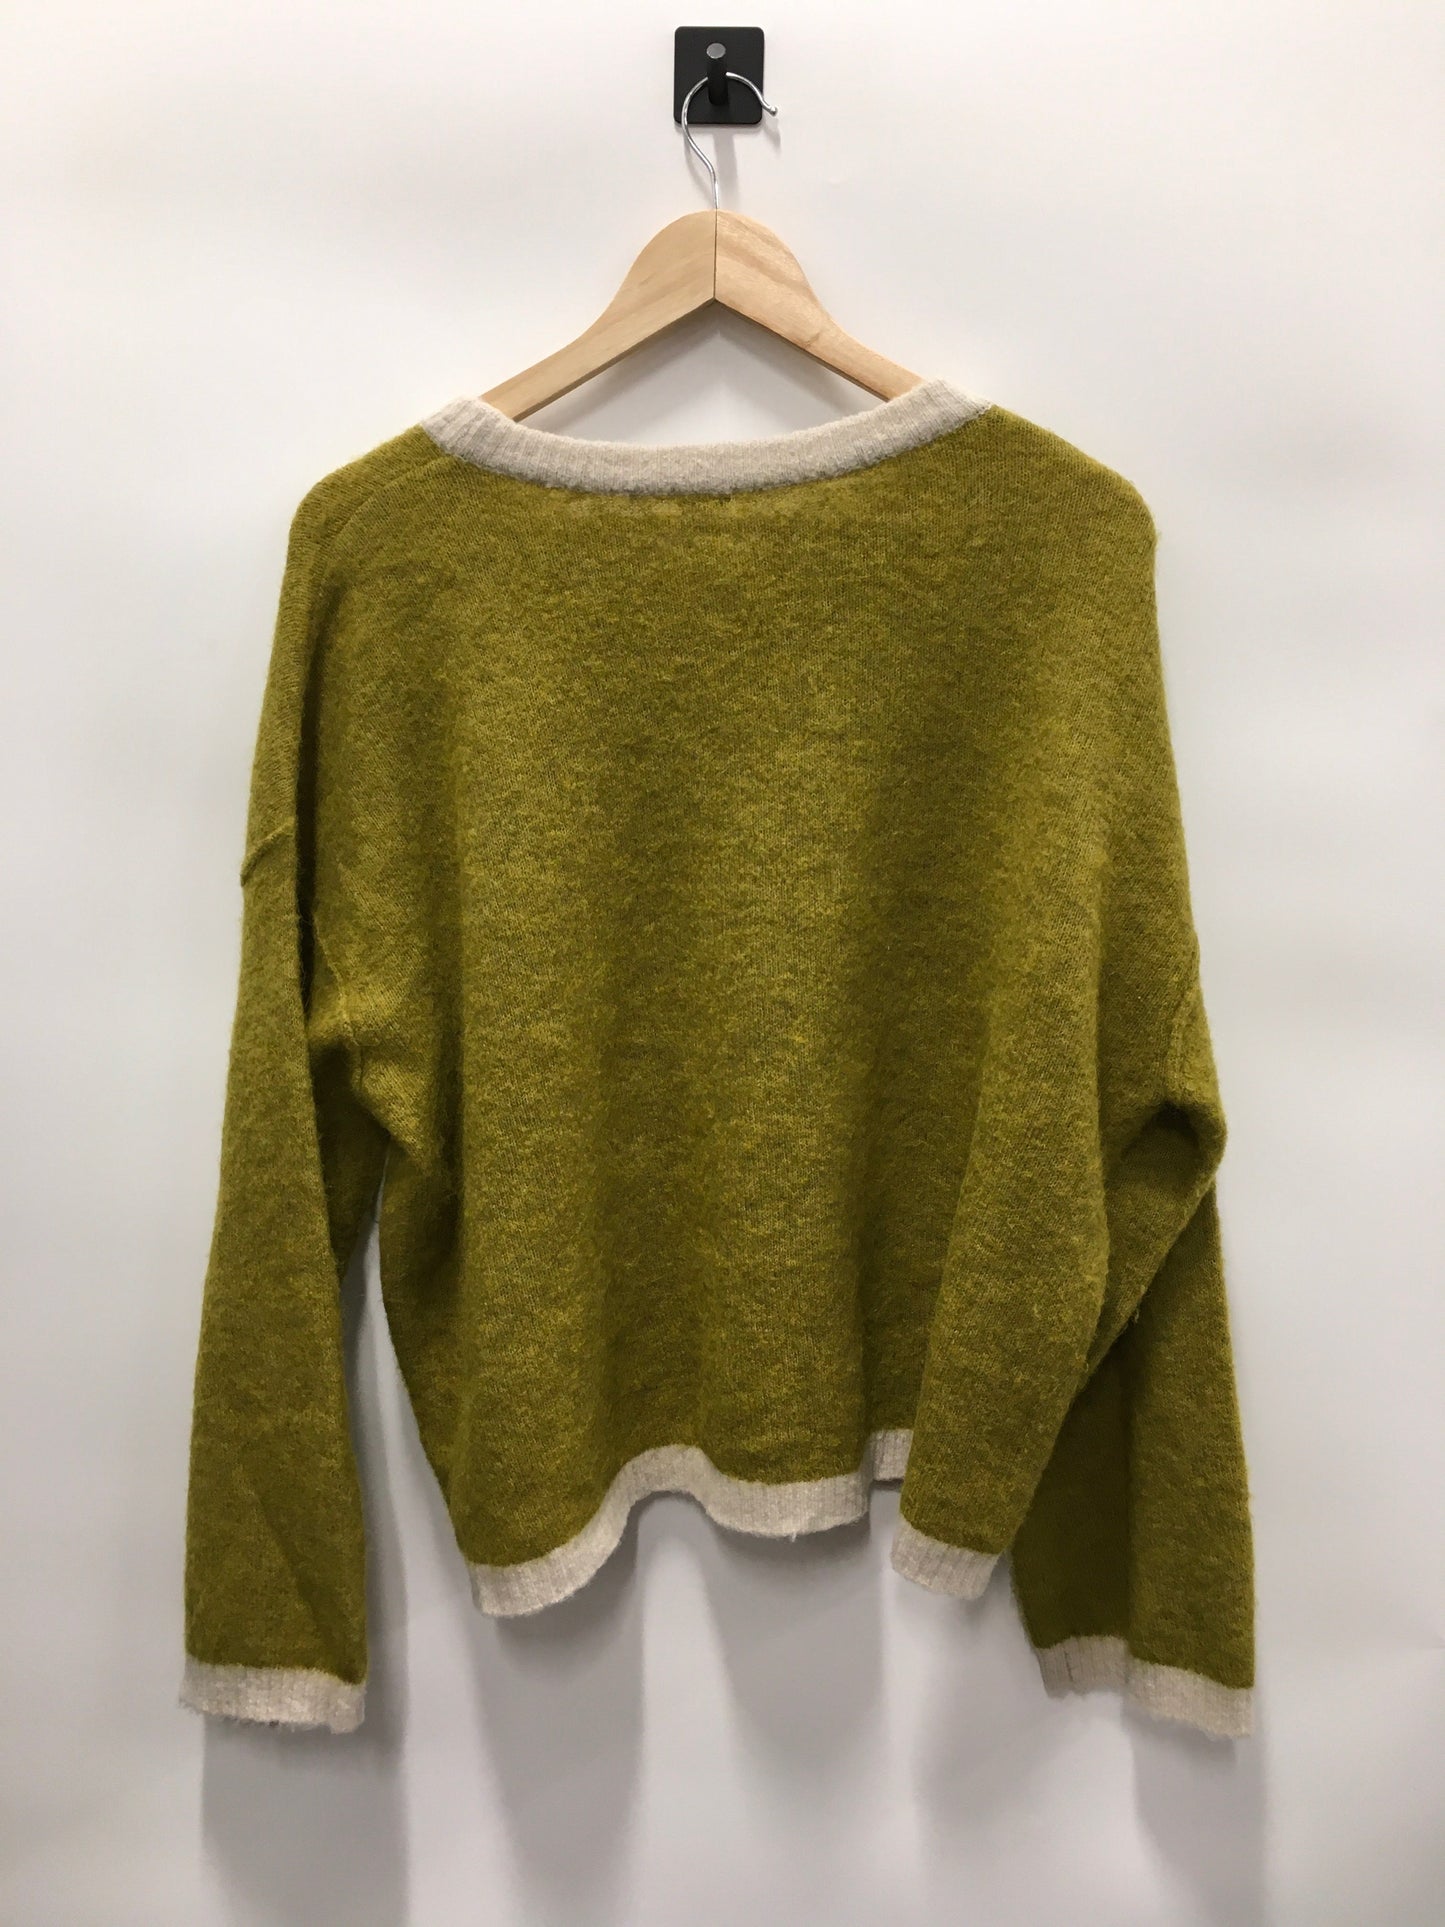 Chartreuse Sweater Free People, Size S